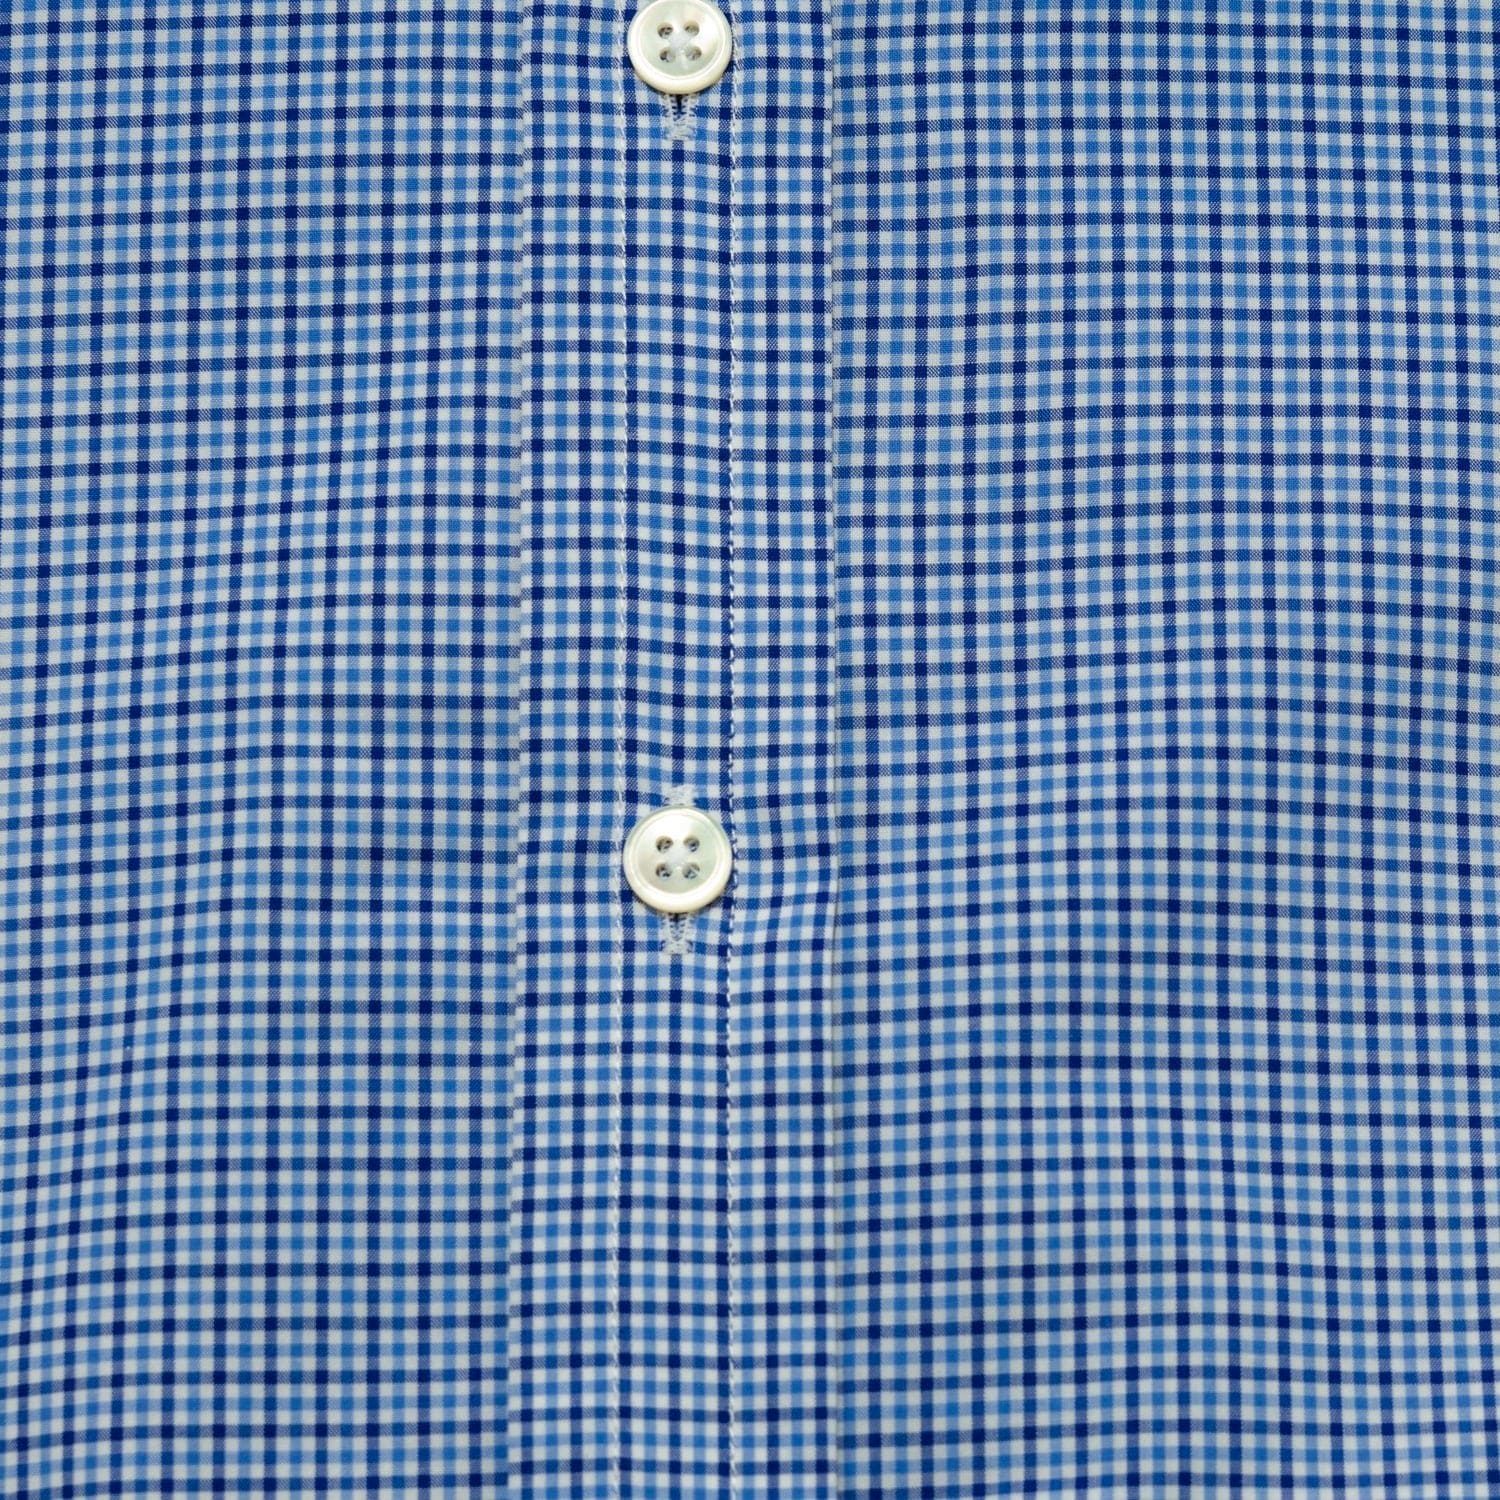 Contemporary Fit, Cutaway Collar, 2 Button Cuff Shirt in Navy & Sky Blue Check